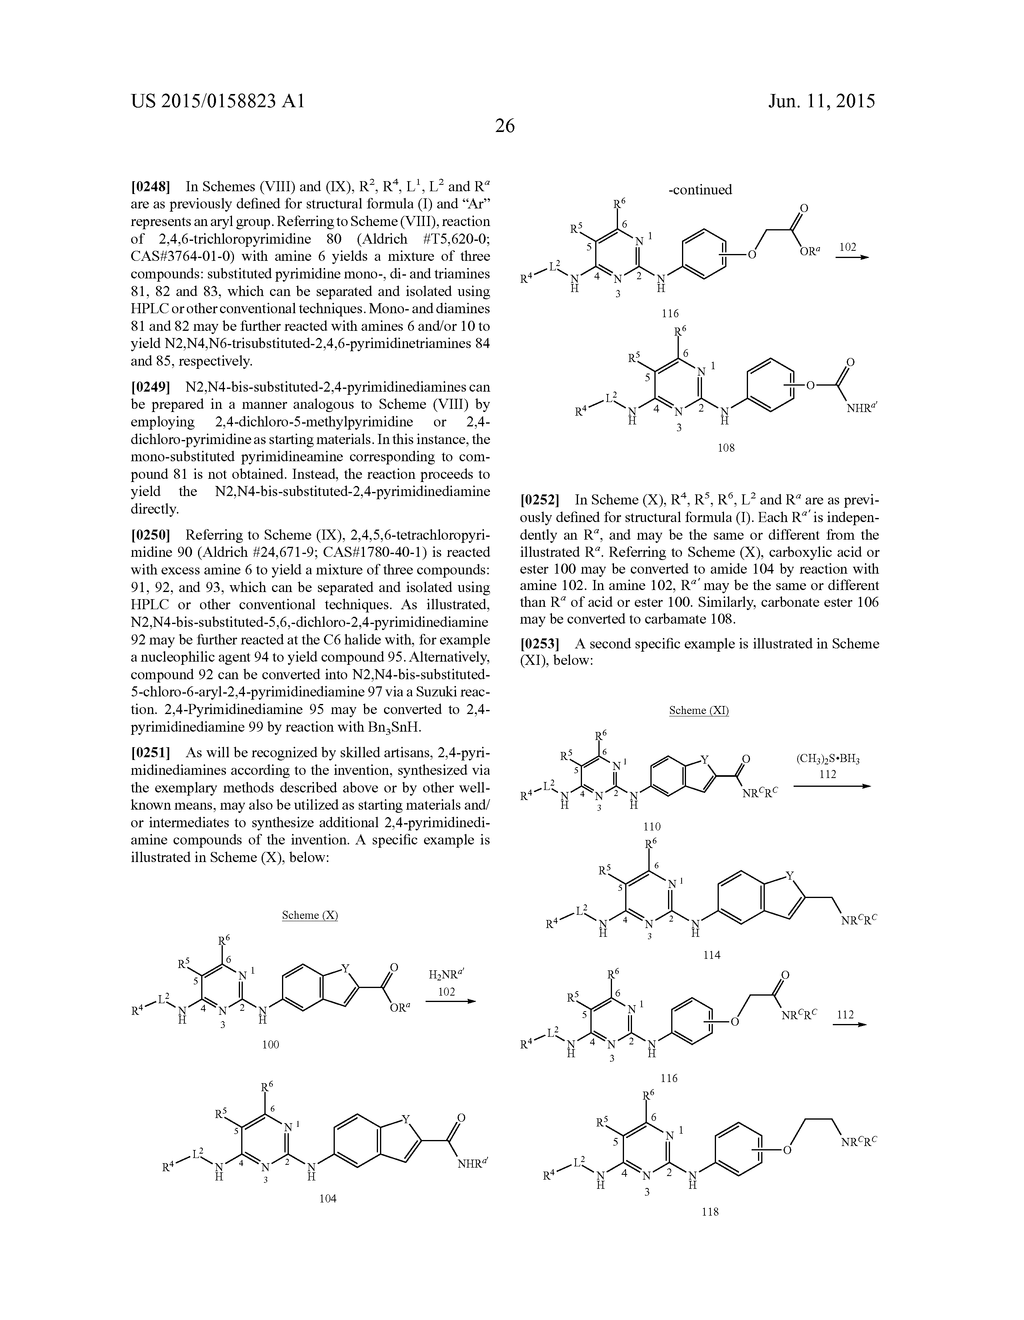 2,4-PYRIMIDINEDIAMINE COMPOUNDS AND THEIR USES - diagram, schematic, and image 41